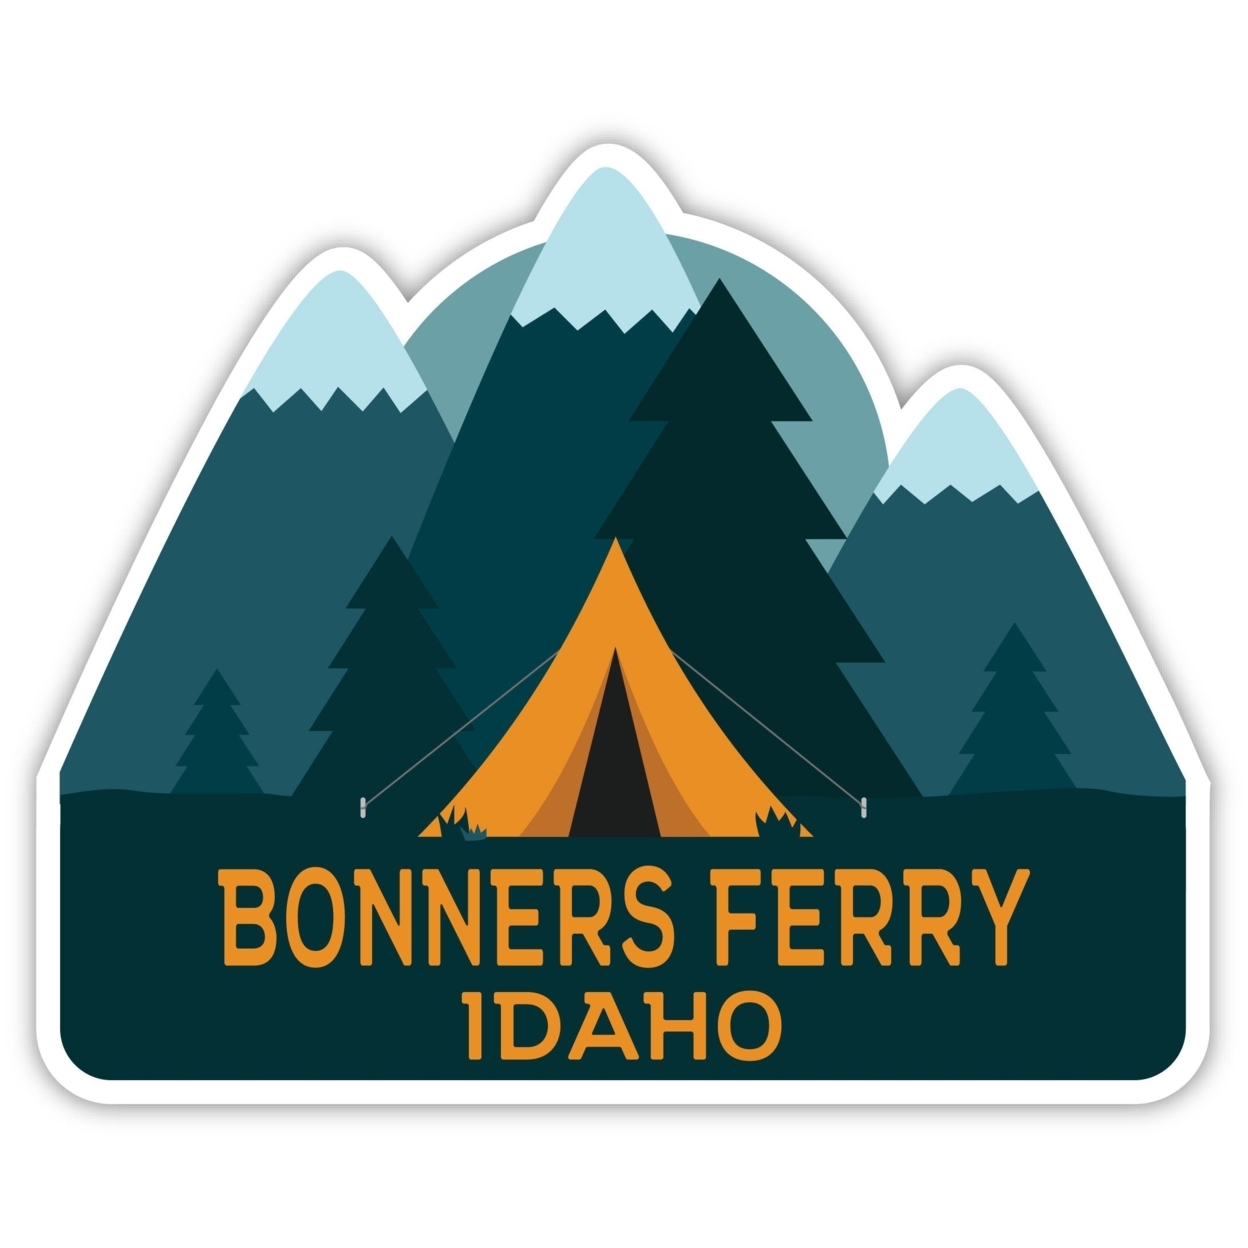 Bonners Ferry Idaho Souvenir Decorative Stickers (Choose Theme And Size) - 4-Pack, 12-Inch, Tent